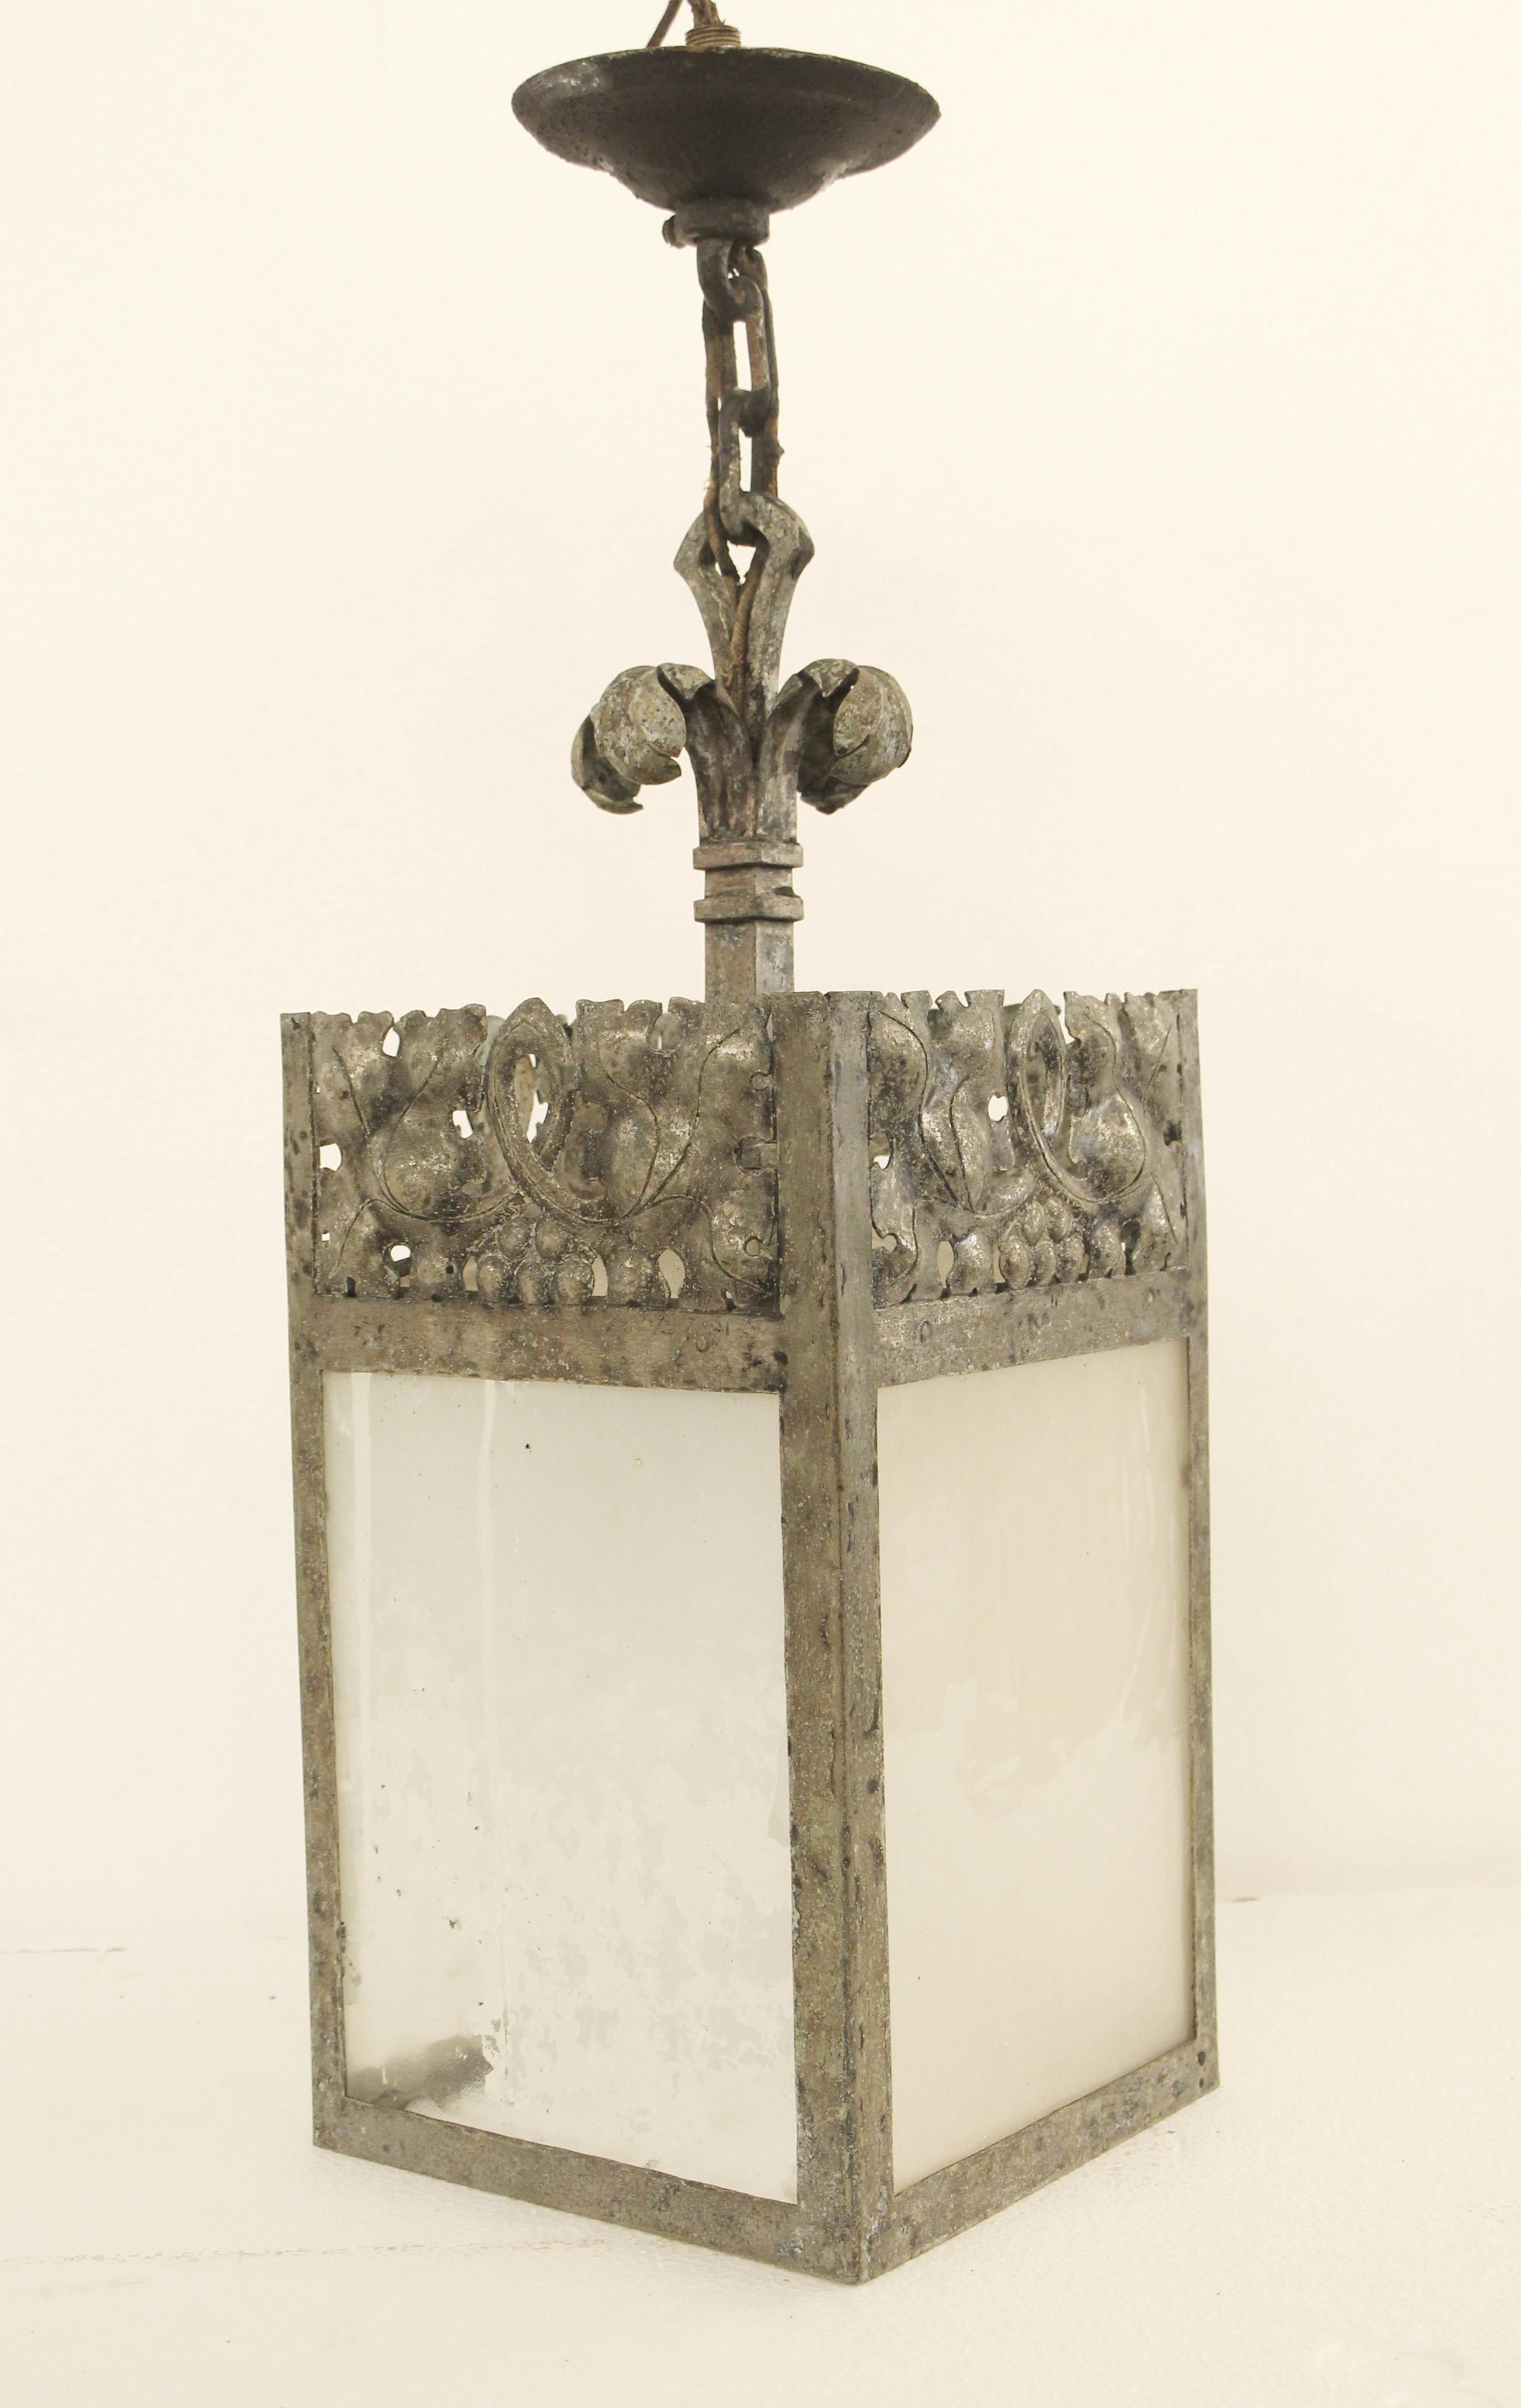 1920s wrought and hammered steel decorative lantern with frosted glass panels. There is wear from age and use and the lantern is sold in as is condition. Pewter-like finish. Some frosting coming off the glass panels. Please see photos. This can be